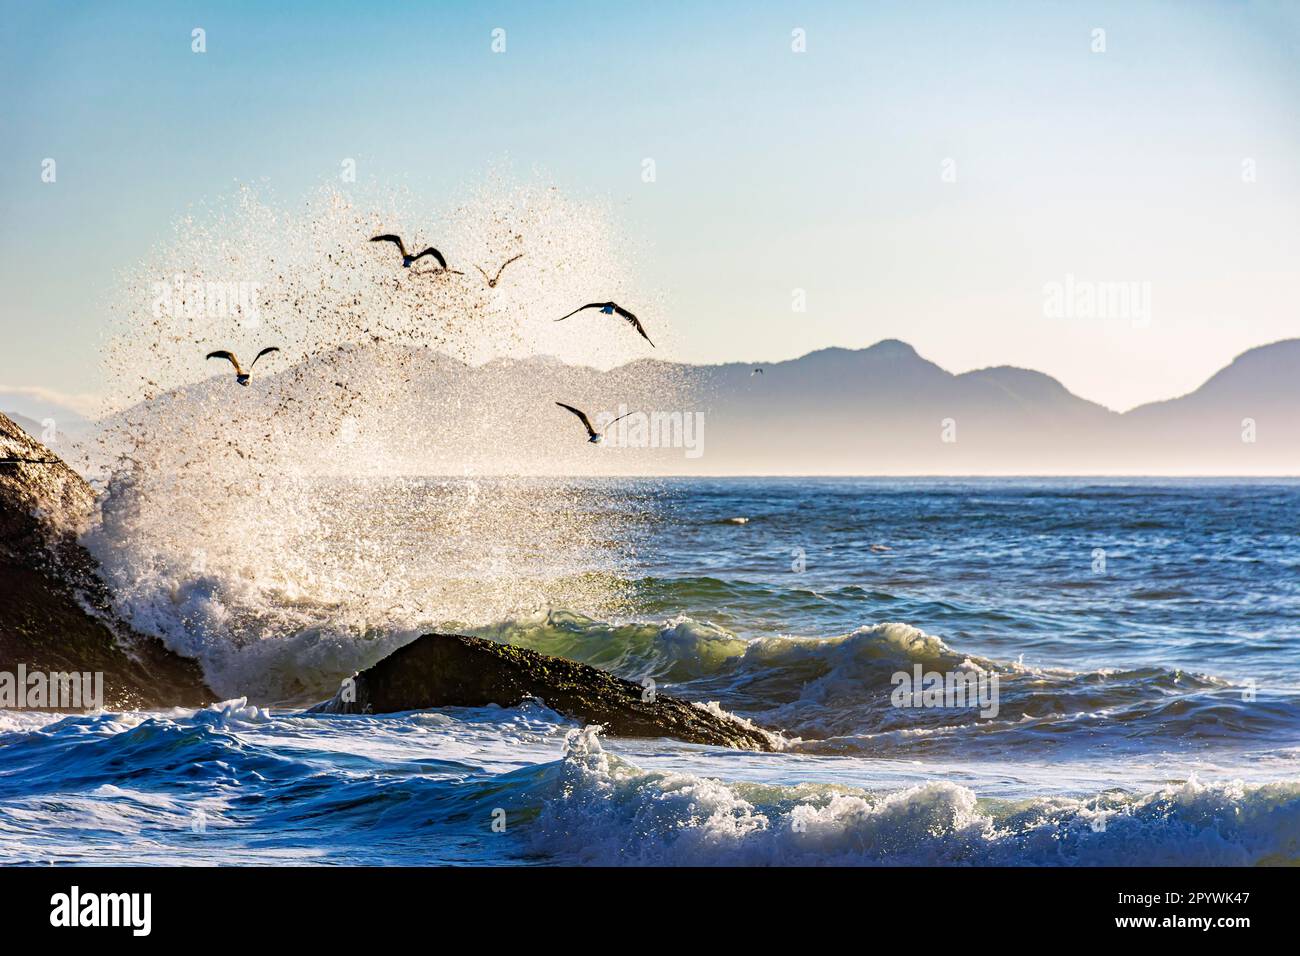 Seagulls flying over the sea at Ipanema beach with the waves in the background during dawn, Brasil Stock Photo